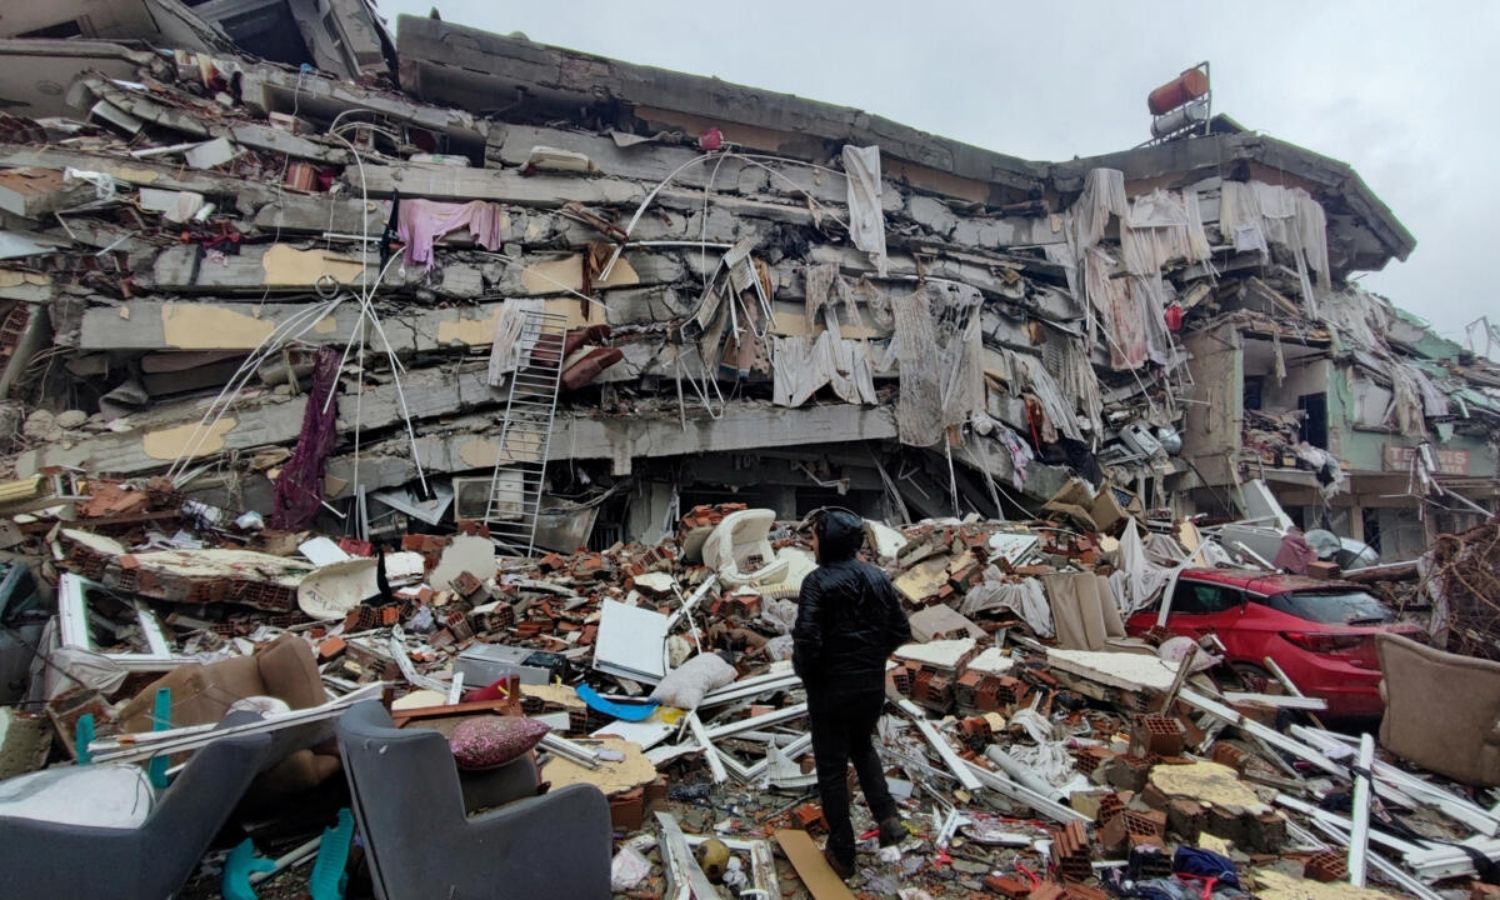 A man looks at the earthquake destruction in the Turkish Kahramanmaraş state - February 6, 2023 (Reuters)